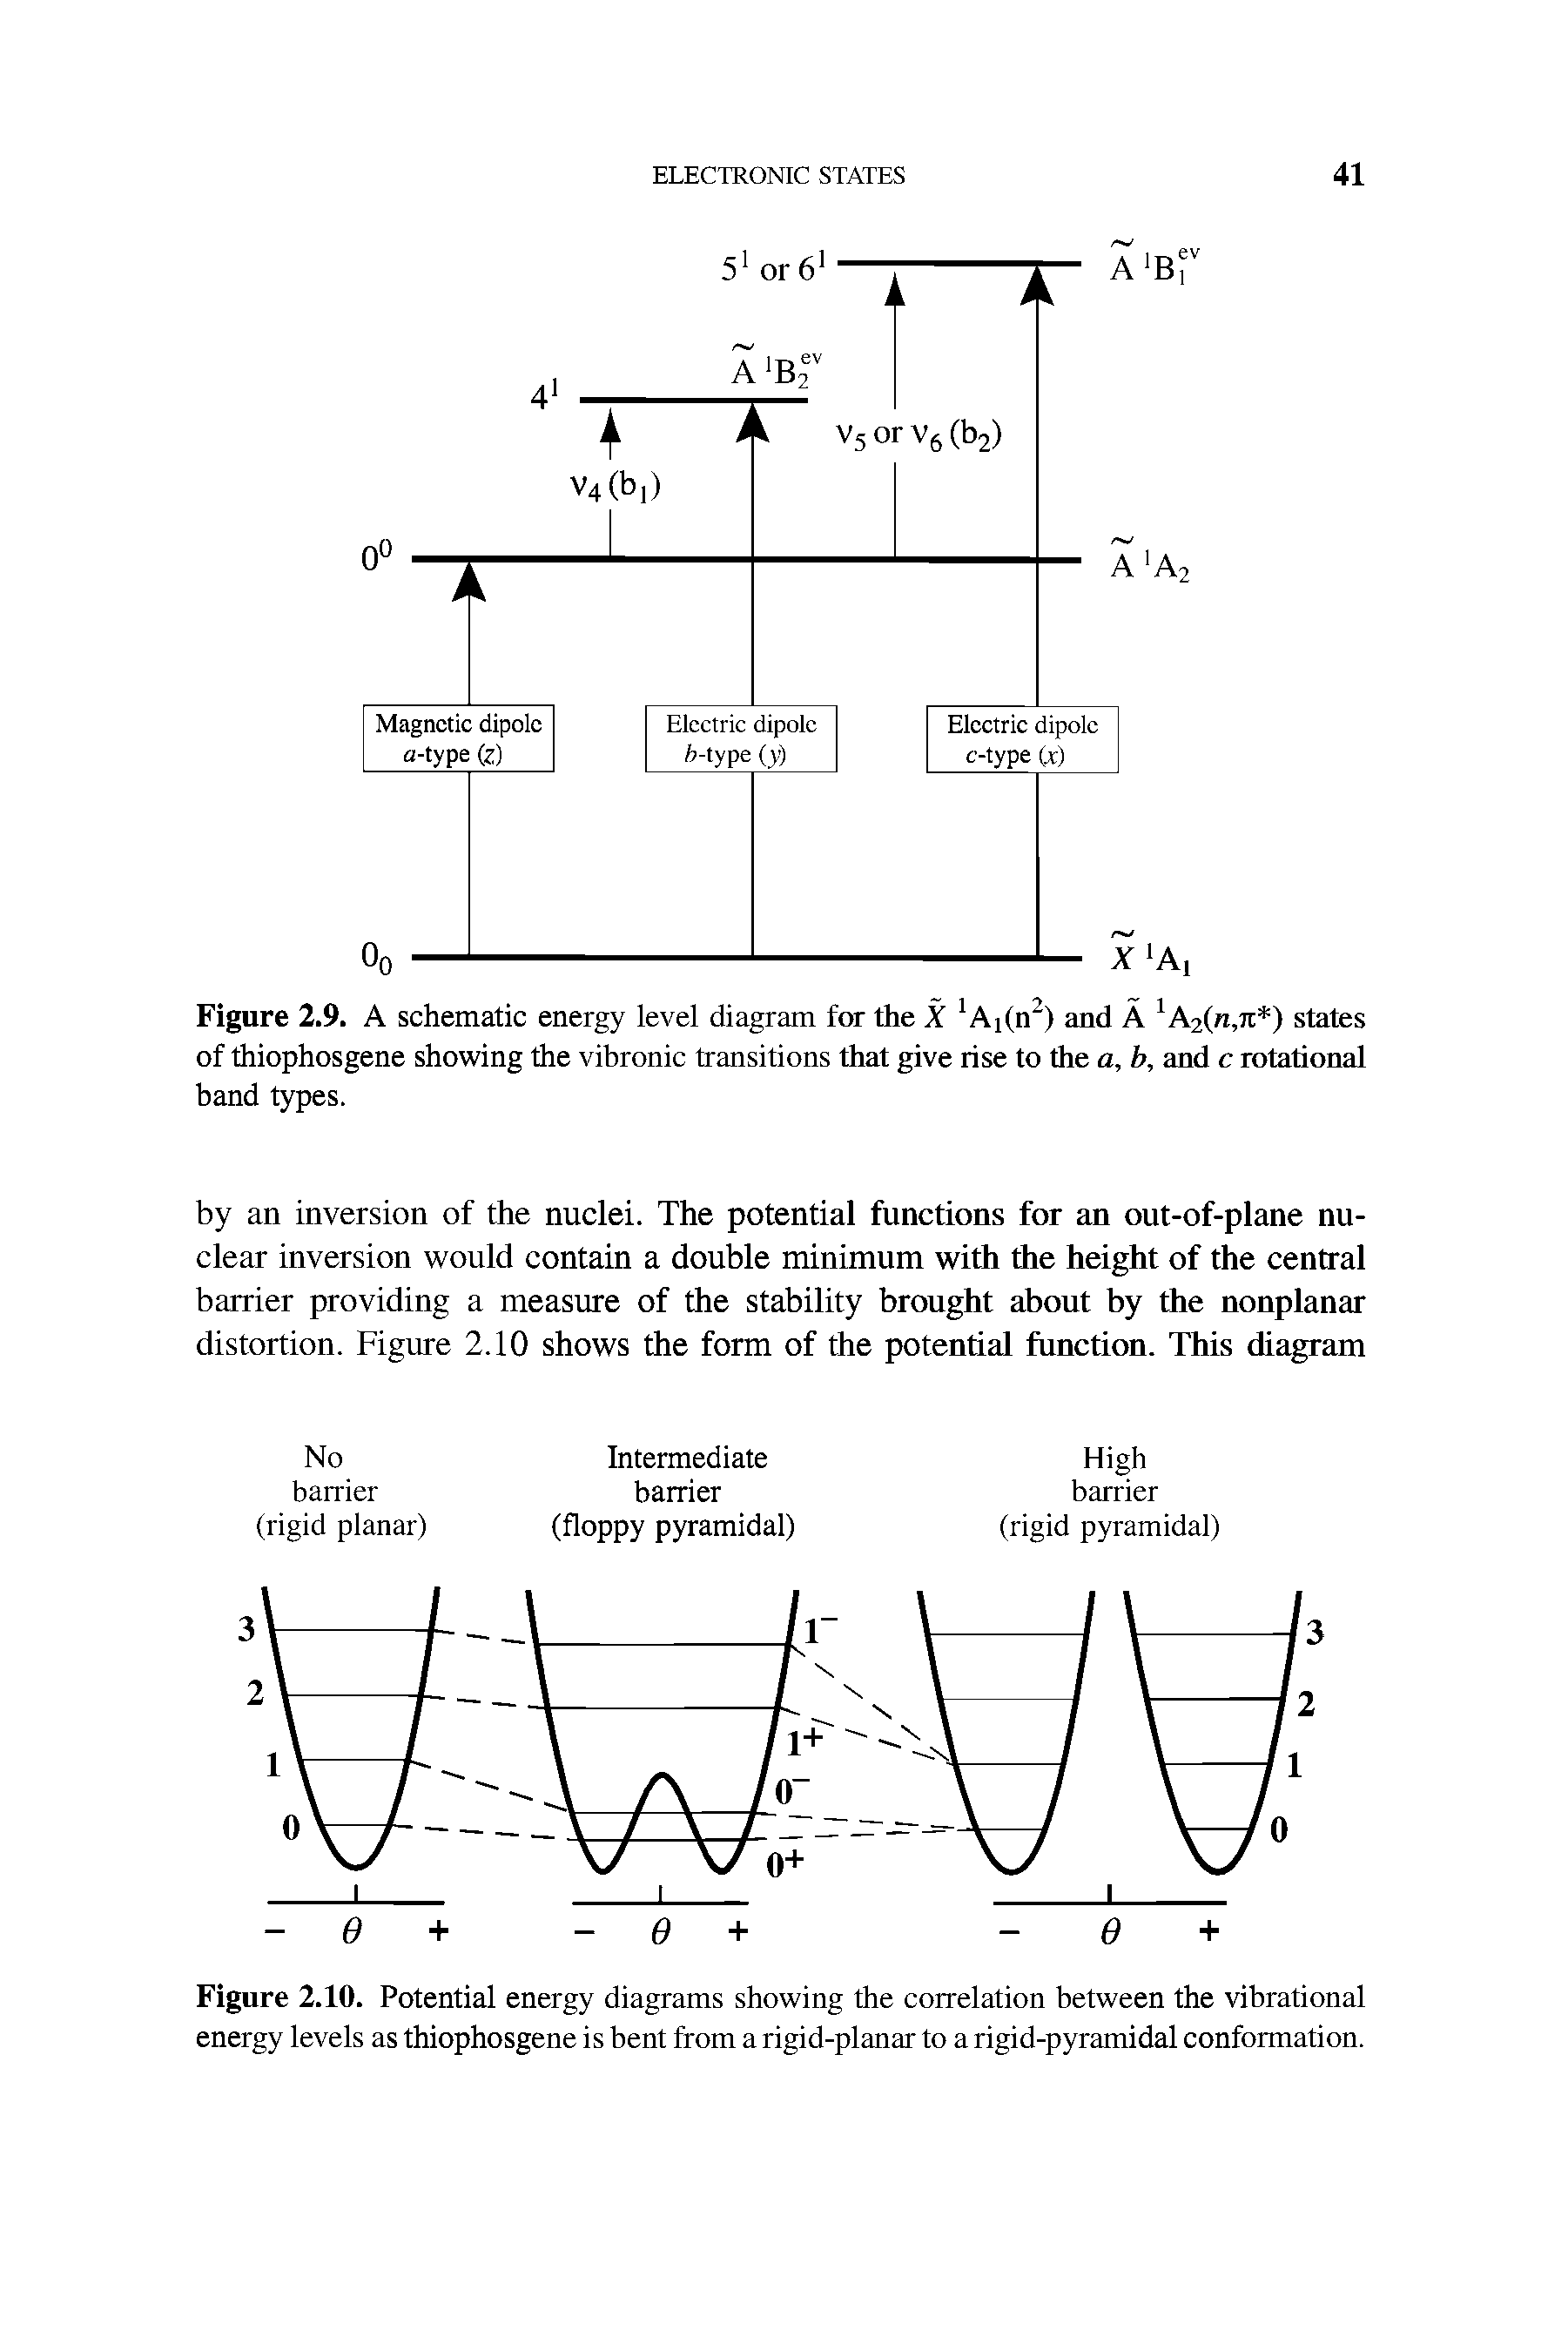 Figure 2.9. A schematic energy level diagram for the X Apn2) and A 1 A2(n,7i ) states of thiophosgene showing the vibronic transitions that give rise to the a, b, and c rotational band types.